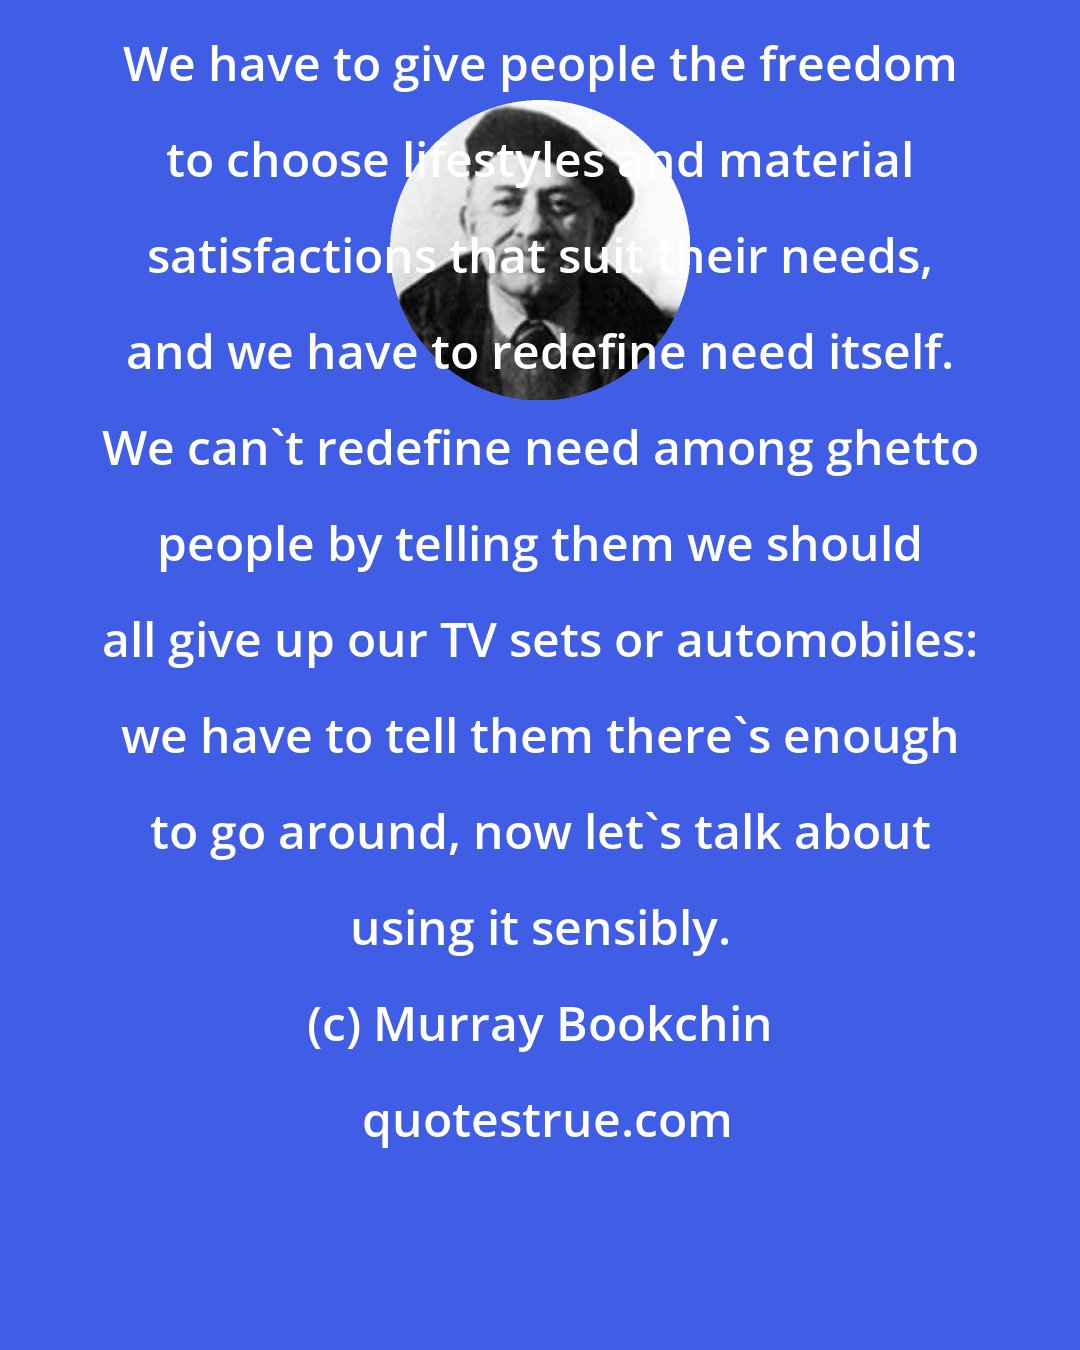 Murray Bookchin: We have to give people the freedom to choose lifestyles and material satisfactions that suit their needs, and we have to redefine need itself. We can't redefine need among ghetto people by telling them we should all give up our TV sets or automobiles: we have to tell them there's enough to go around, now let's talk about using it sensibly.